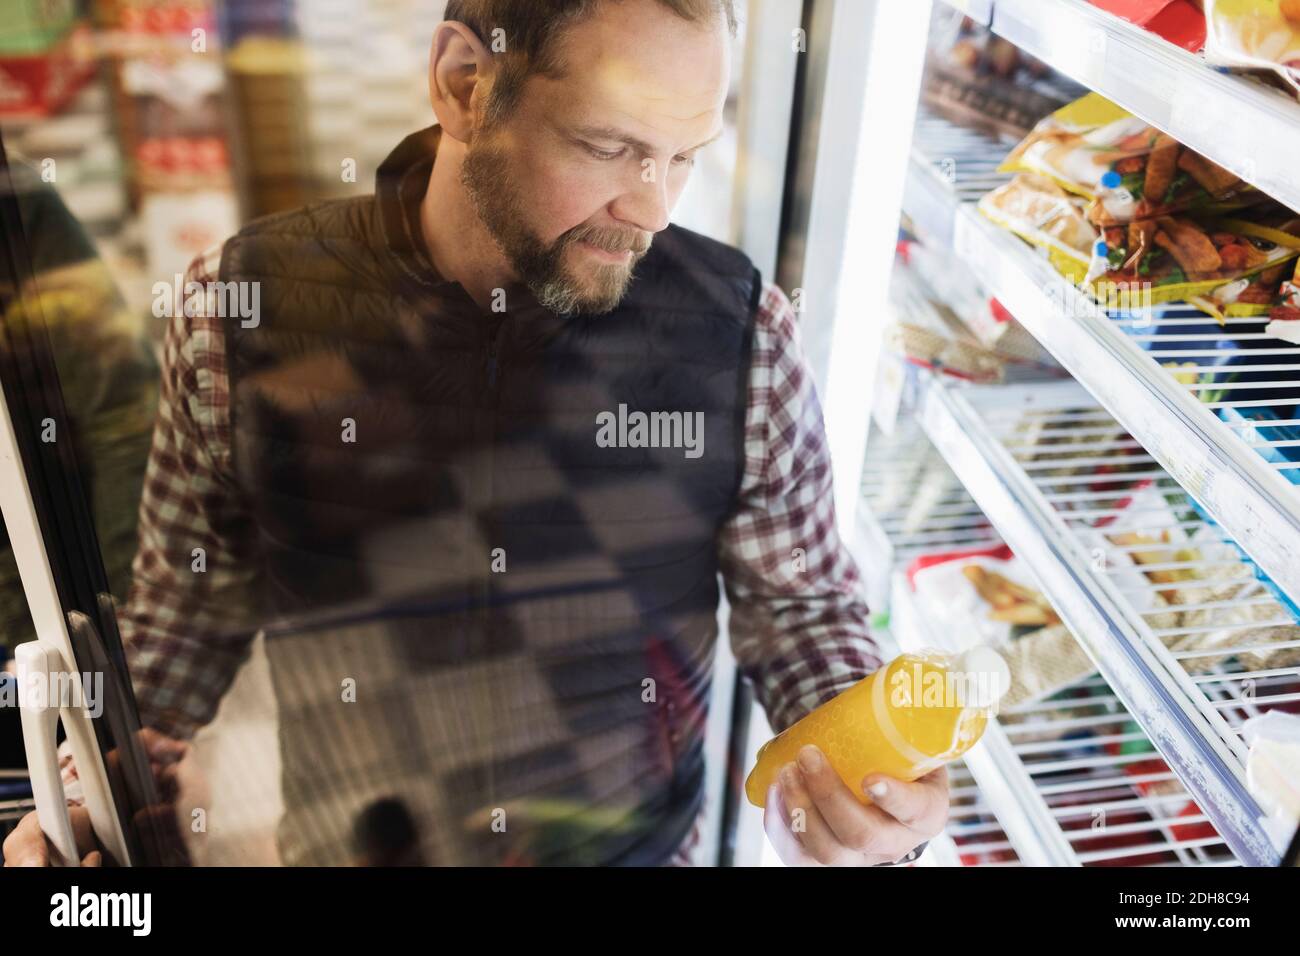 High angle view of male customer reading drink label at refrigerated section Stock Photo